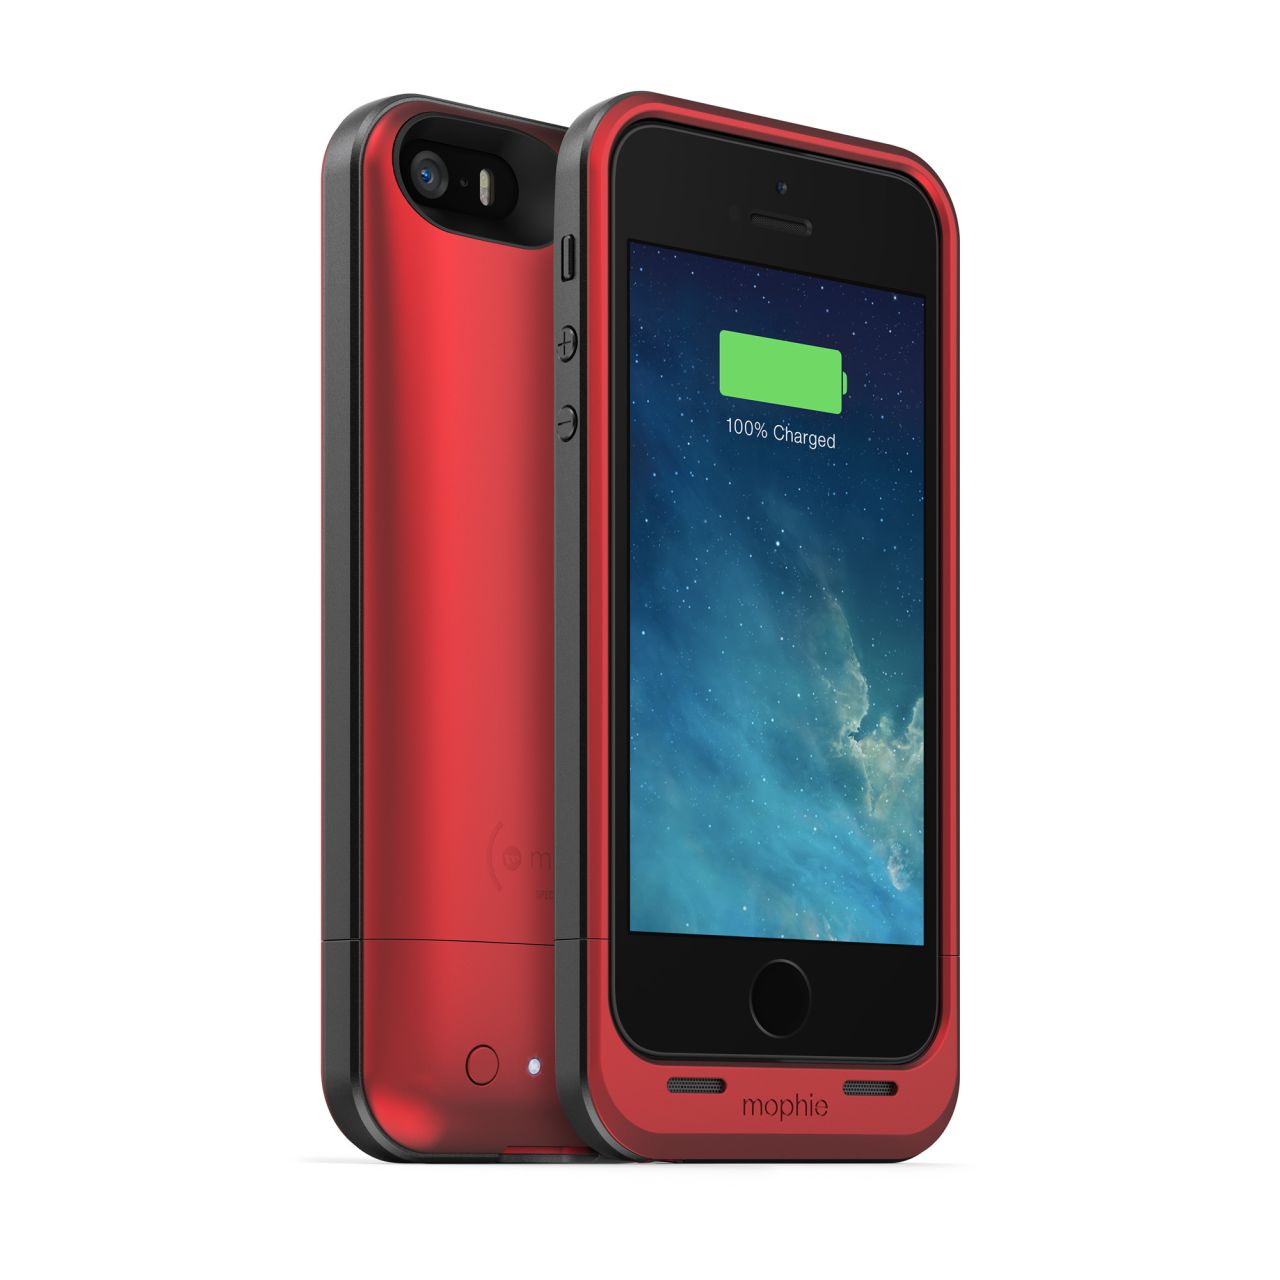 <strong>Mophie Juice Pack Air, PRODUCT (RED) edition.</strong> We've all been there. It's been a long, energy-sucking day, and your iPhone is out of power. The Mophie Juice Pack Air is both a case and battery pack that can double battery life. Some funds from sales of the PRODUCT (RED) edition<a href="http://www.mophie.com/shop/product-red" target="_blank" target="_blank"> go to AIDS research</a>. It's a winning combination all around. ($79.99-119.99, depending on specs)<br />